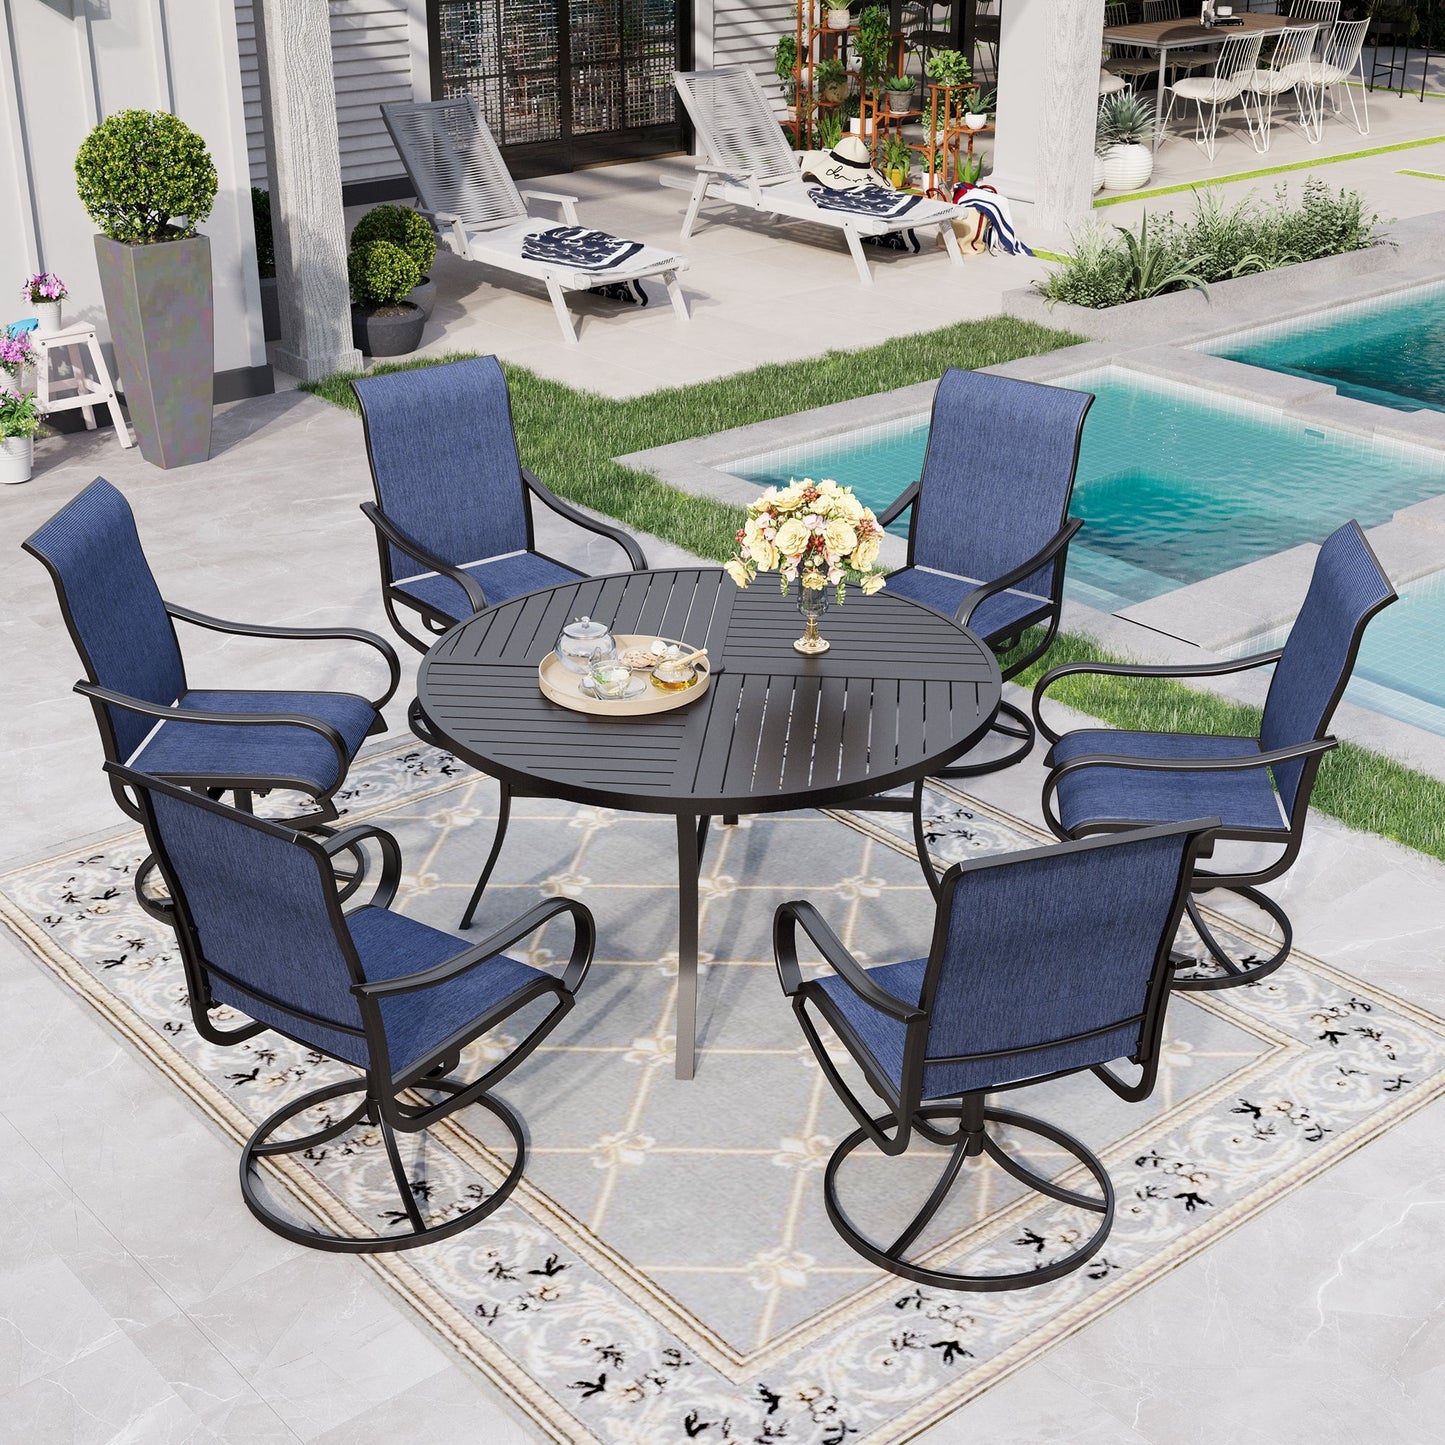 Sophia & William 7 Piece Outdoor Patio Dining Set Textilene Chairs and 54" Round Table Furniture Set